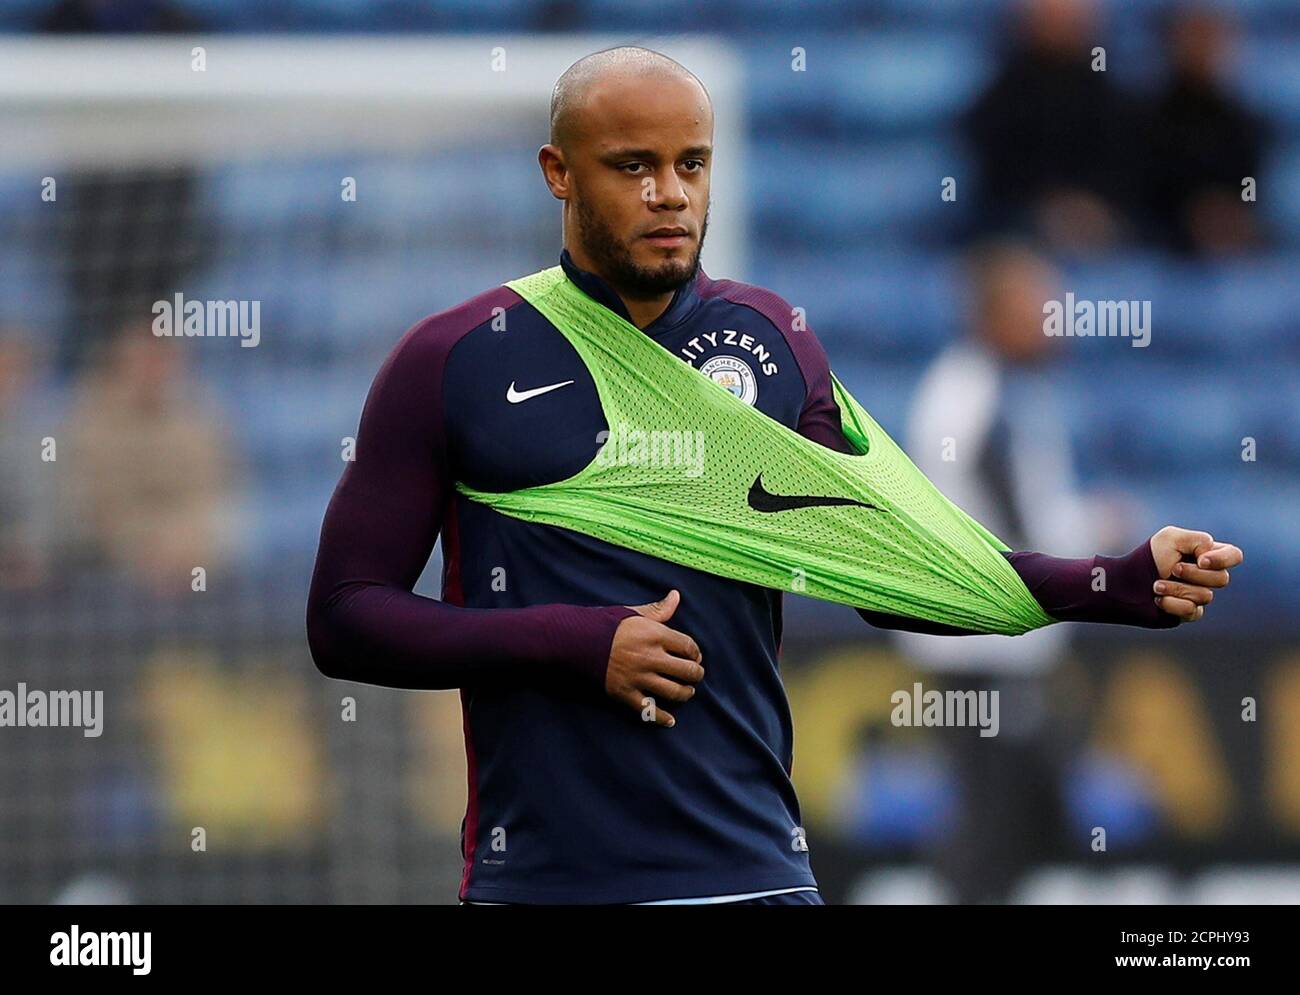 Soccer Football - Premier League - Leicester City vs Manchester City - King Power Stadium, Leicester, Britain - November 18, 2017   Manchester City's Vincent Kompany warms up before the match   REUTERS/Darren Staples    EDITORIAL USE ONLY. No use with unauthorized audio, video, data, fixture lists, club/league logos or 'live' services. Online in-match use limited to 75 images, no video emulation. No use in betting, games or single club/league/player publications. Please contact your account representative for further details. Stock Photo